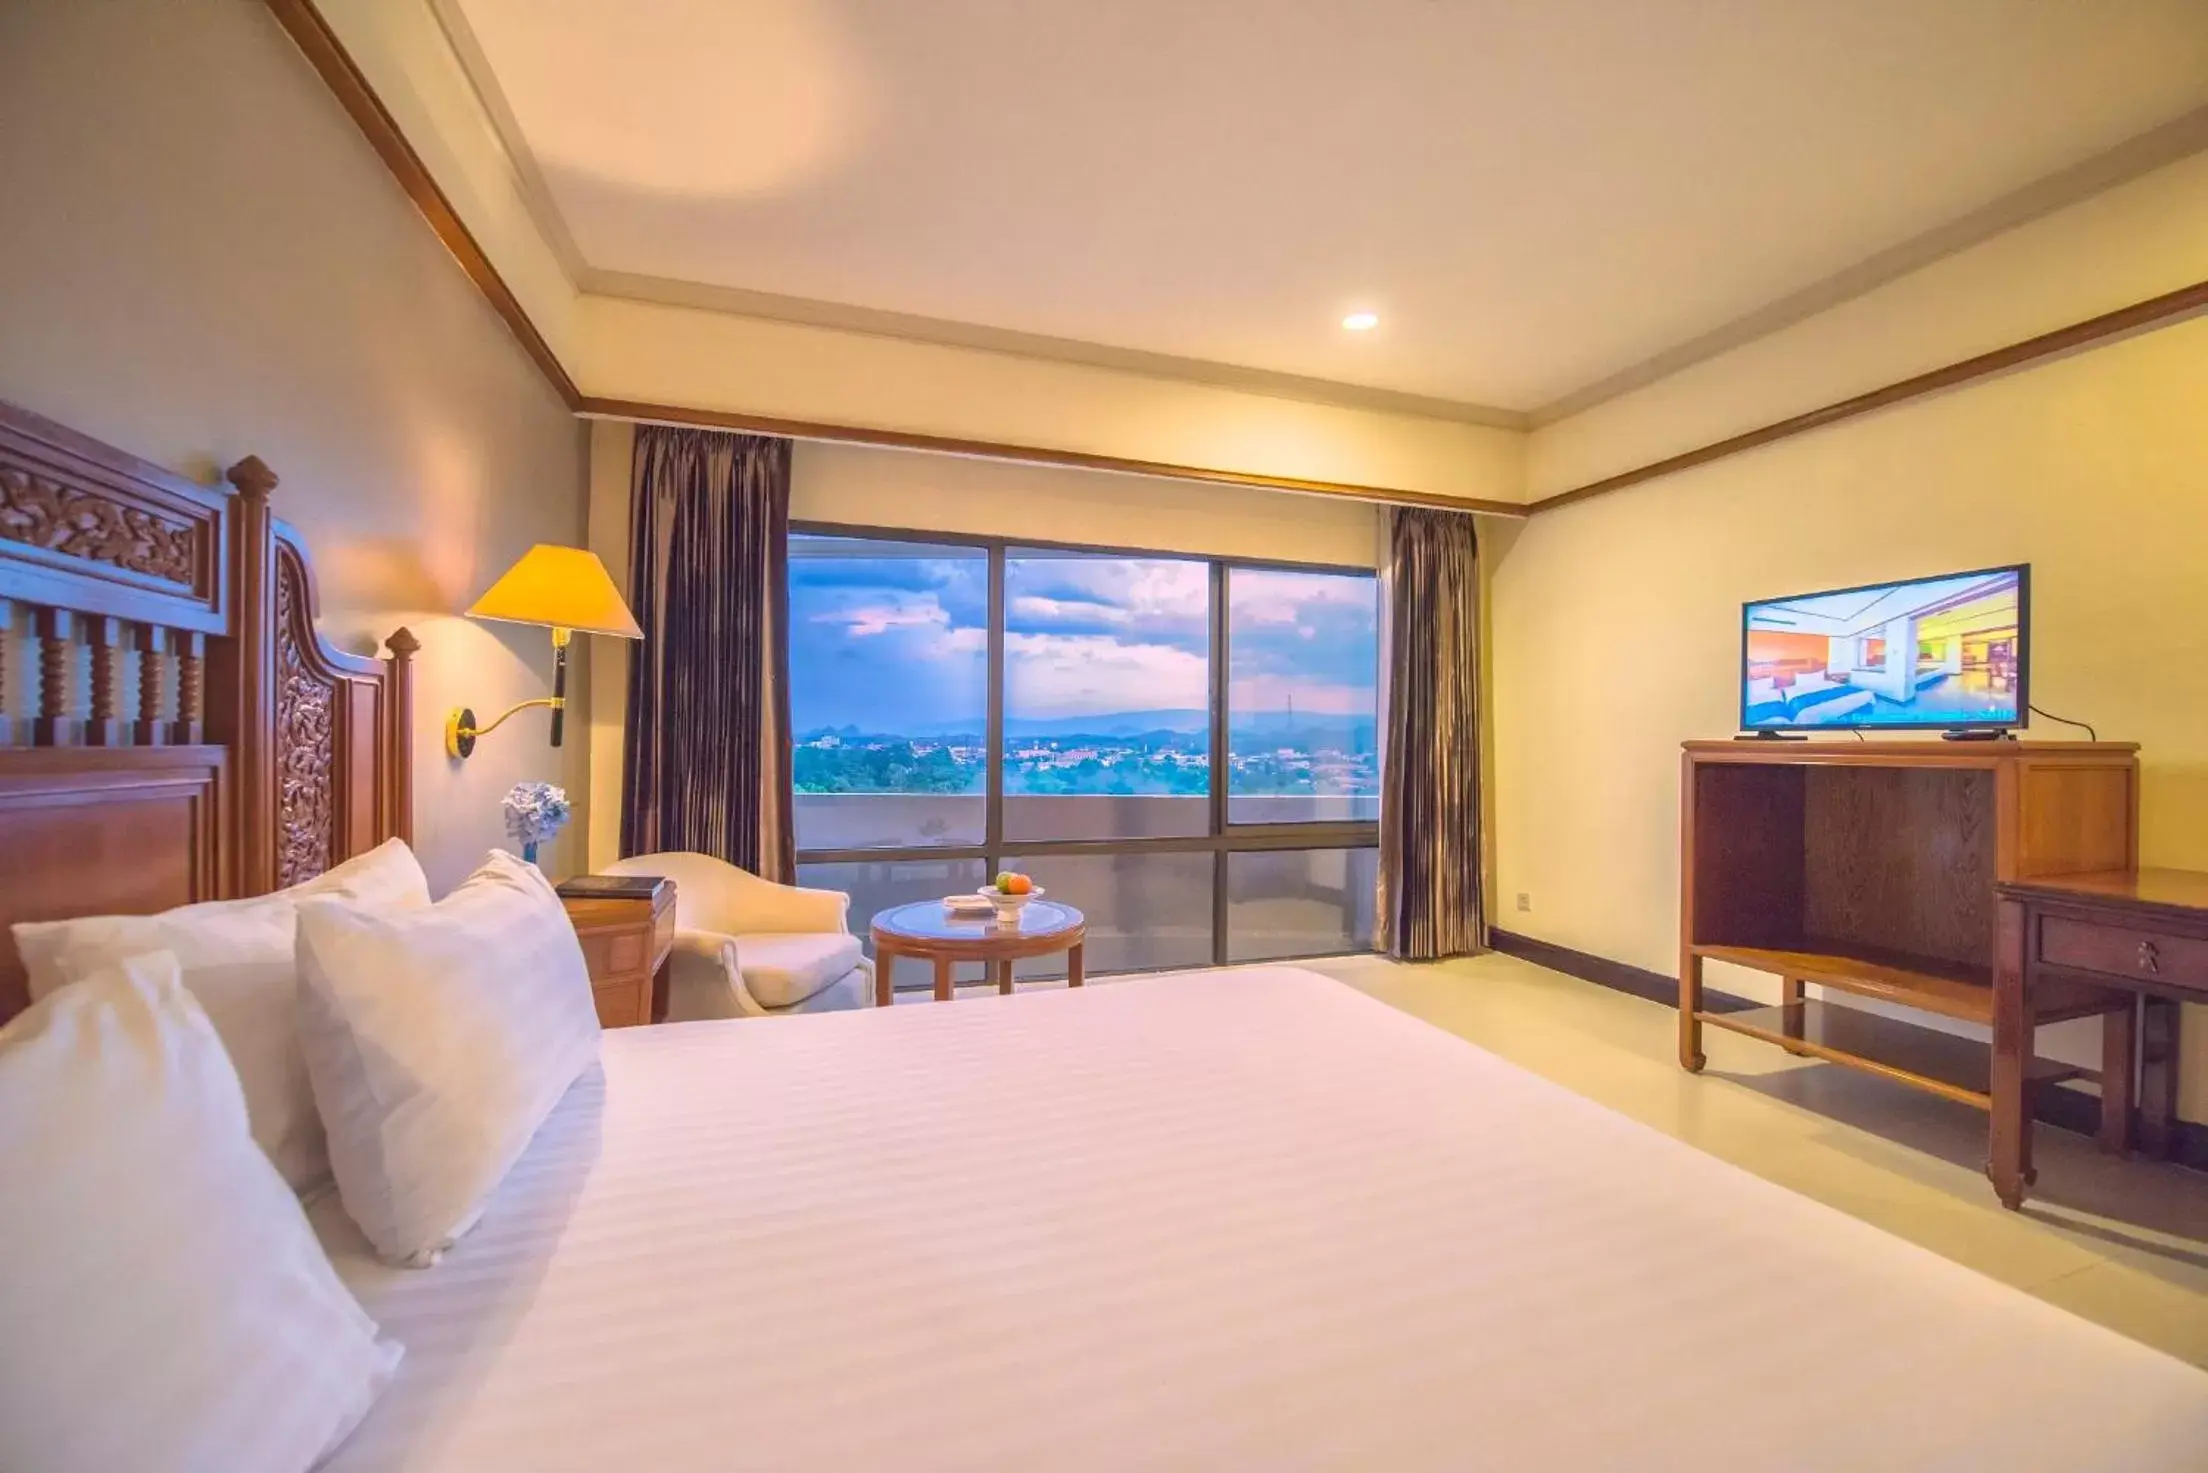 TV and multimedia in Loei Palace Hotel